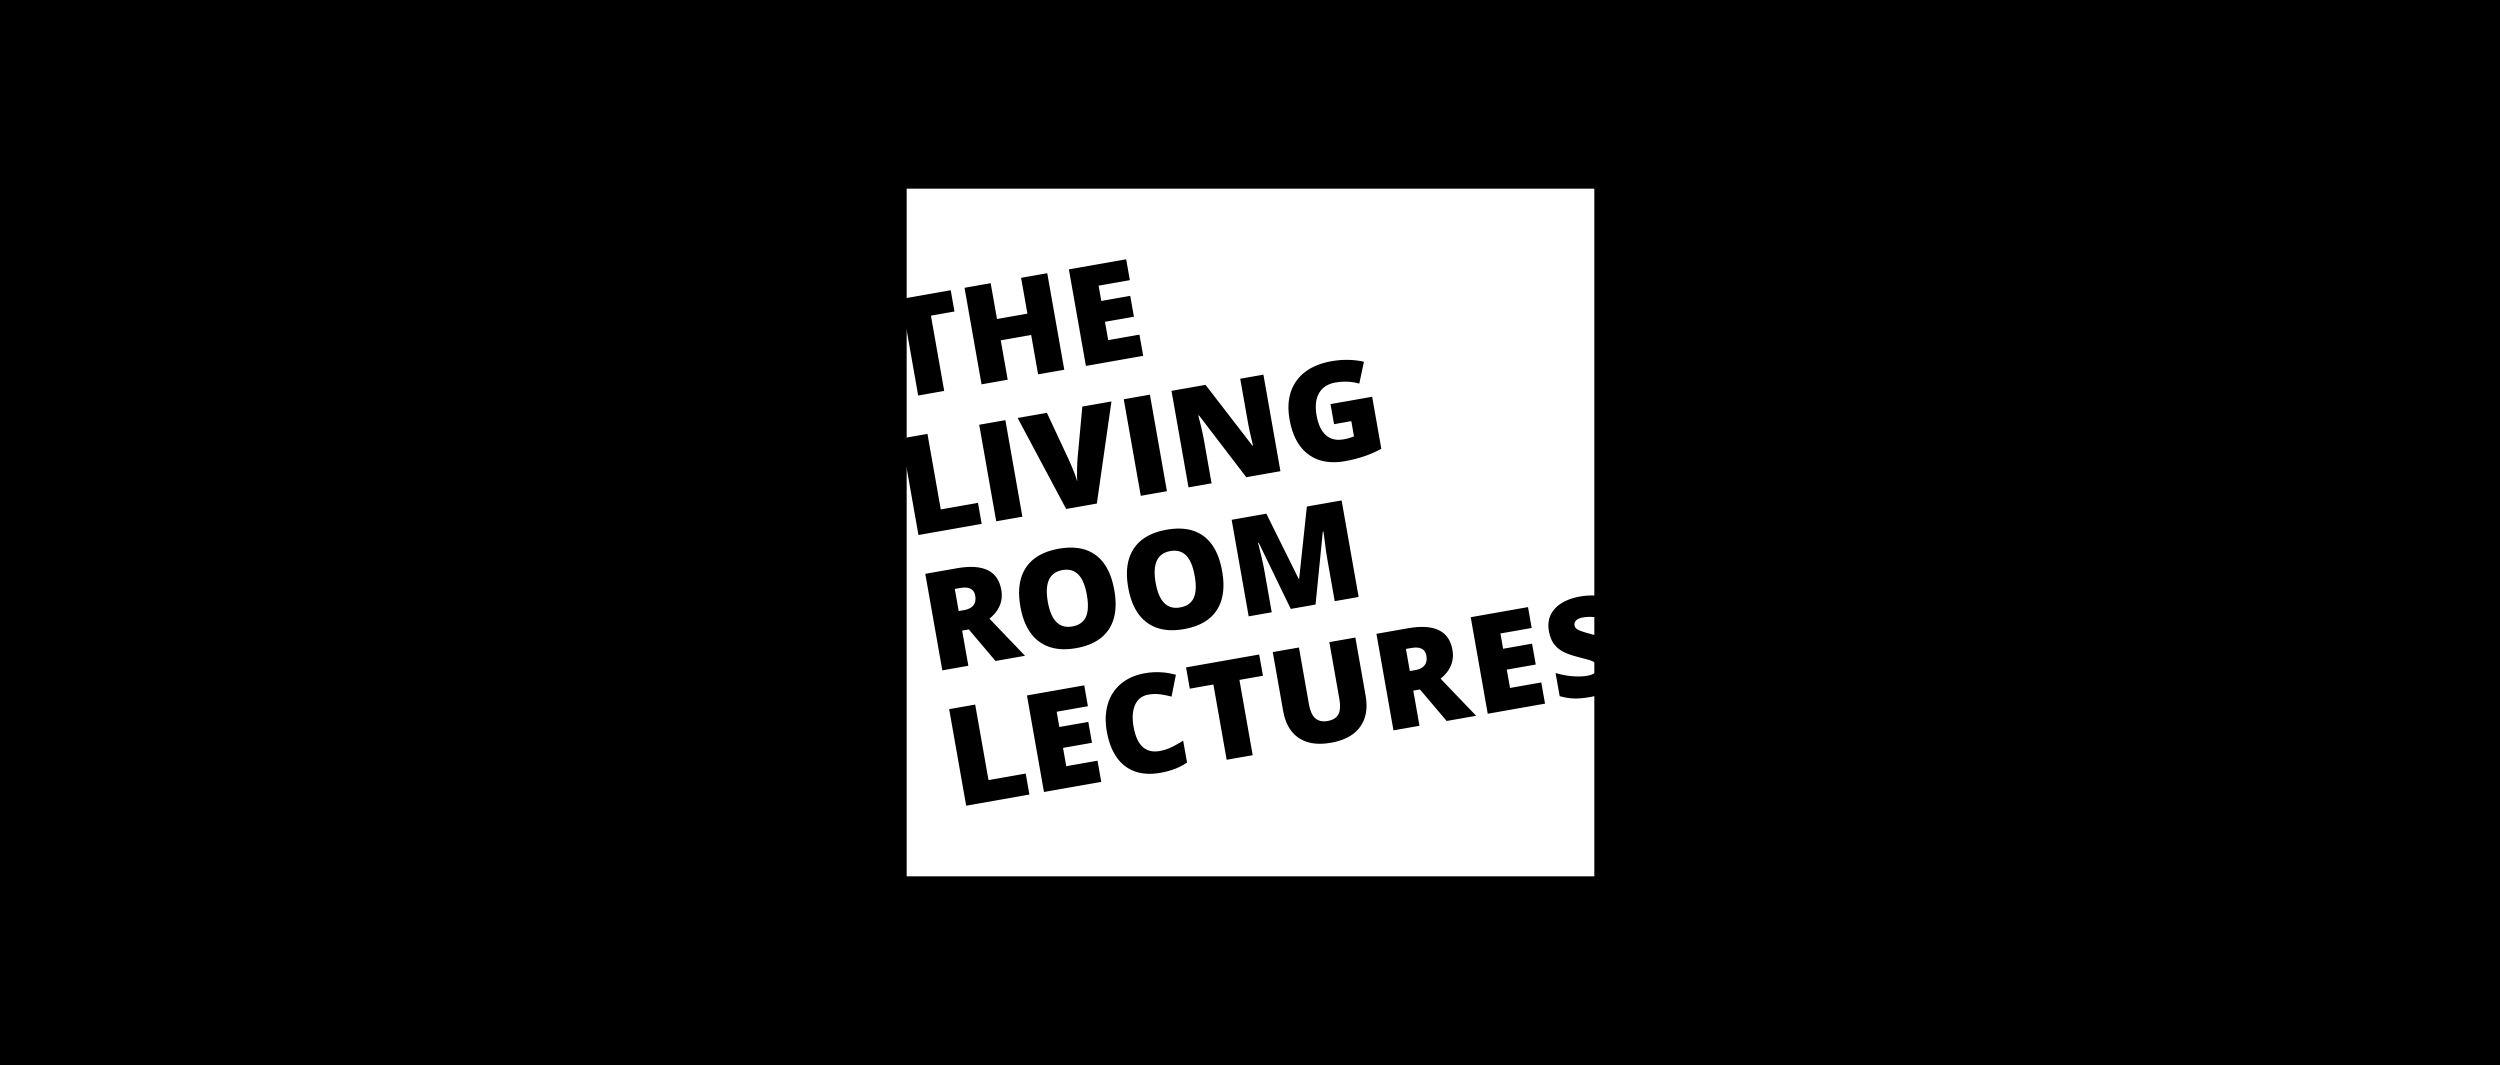 The Living Room Lectures logo